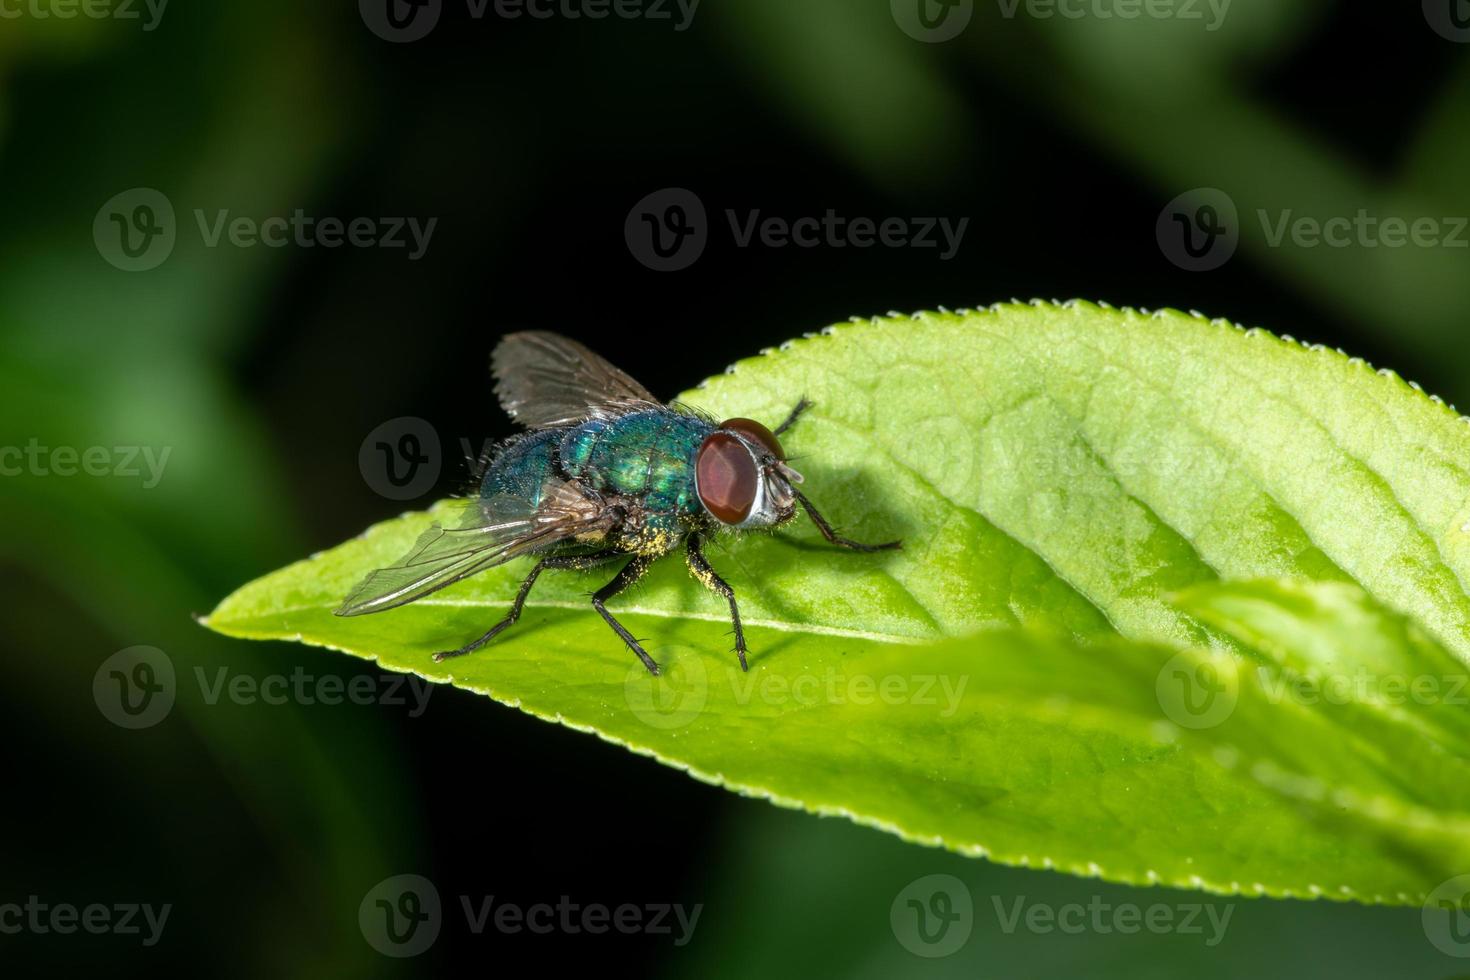 Detail of a blowfly sitting on a leaf against a green background photo